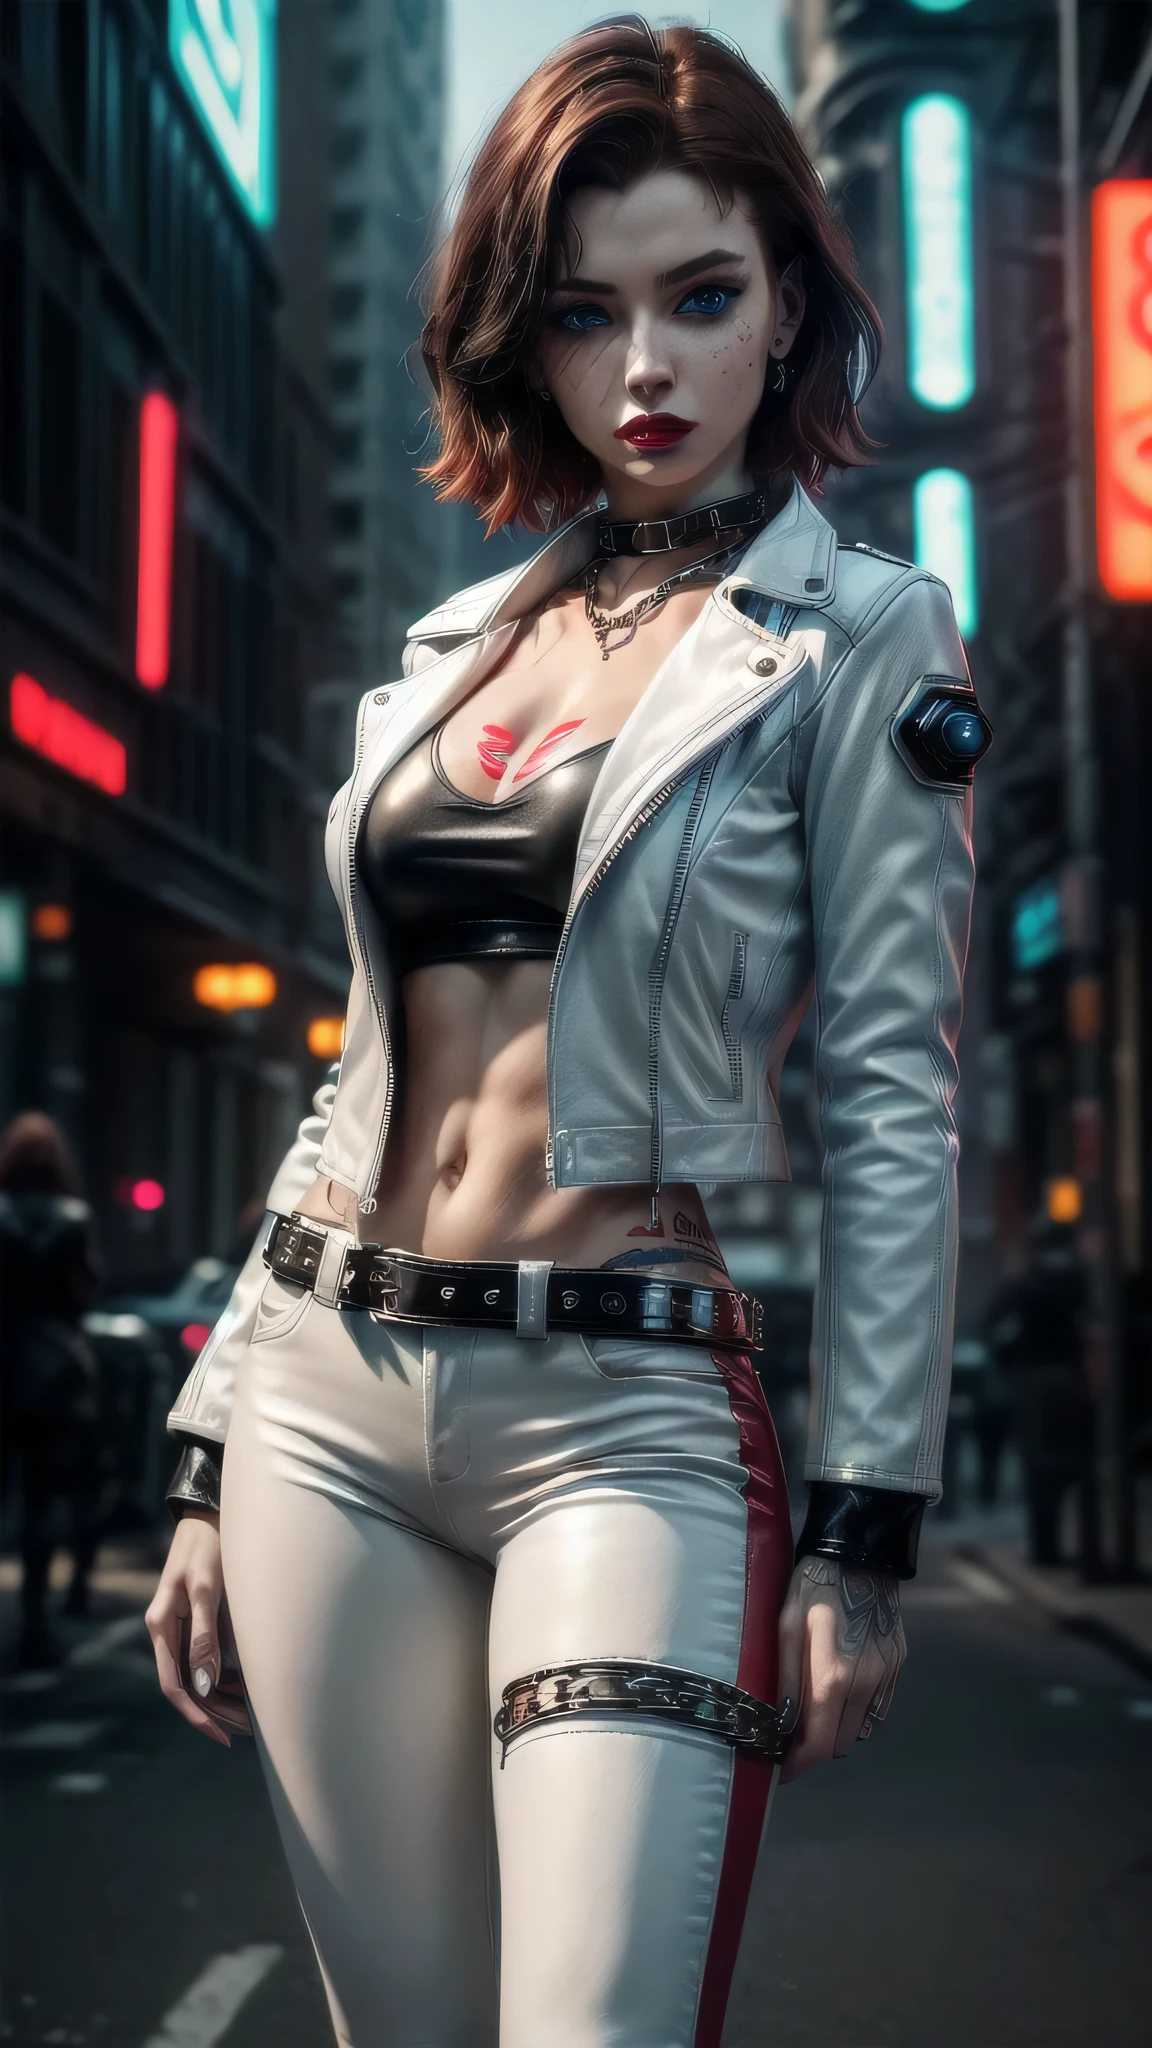 (masterpiece), (extremely intricate:1.3), (realistic), female, 19 years old, ((((([small breasts:large breasts:0.8], short [dark hair:bright ginger hair:0.7], solo, 1girl, sultry red lipstick, (athletic), futuristic cyberpunk street))))), metal reflections, outdoor, intense sunlight, golden hour, professional photograph of a stunning girl detailed, sharp focus, dramatic, award winning, cinematic lighting, volumetrics dtx, (film grain, blurry background, blurry foreground, bokeh, depth of field, interaction), 8K, ((((iceblue eyes, dark eye makeup)))), ((body tattoo: 1.2)), ((fujicolor, god rays)) BREAK; BREAK ((((white leather jacket, collar, chains), leather pants, black t-shirt), hyperrealistic, absurdres))